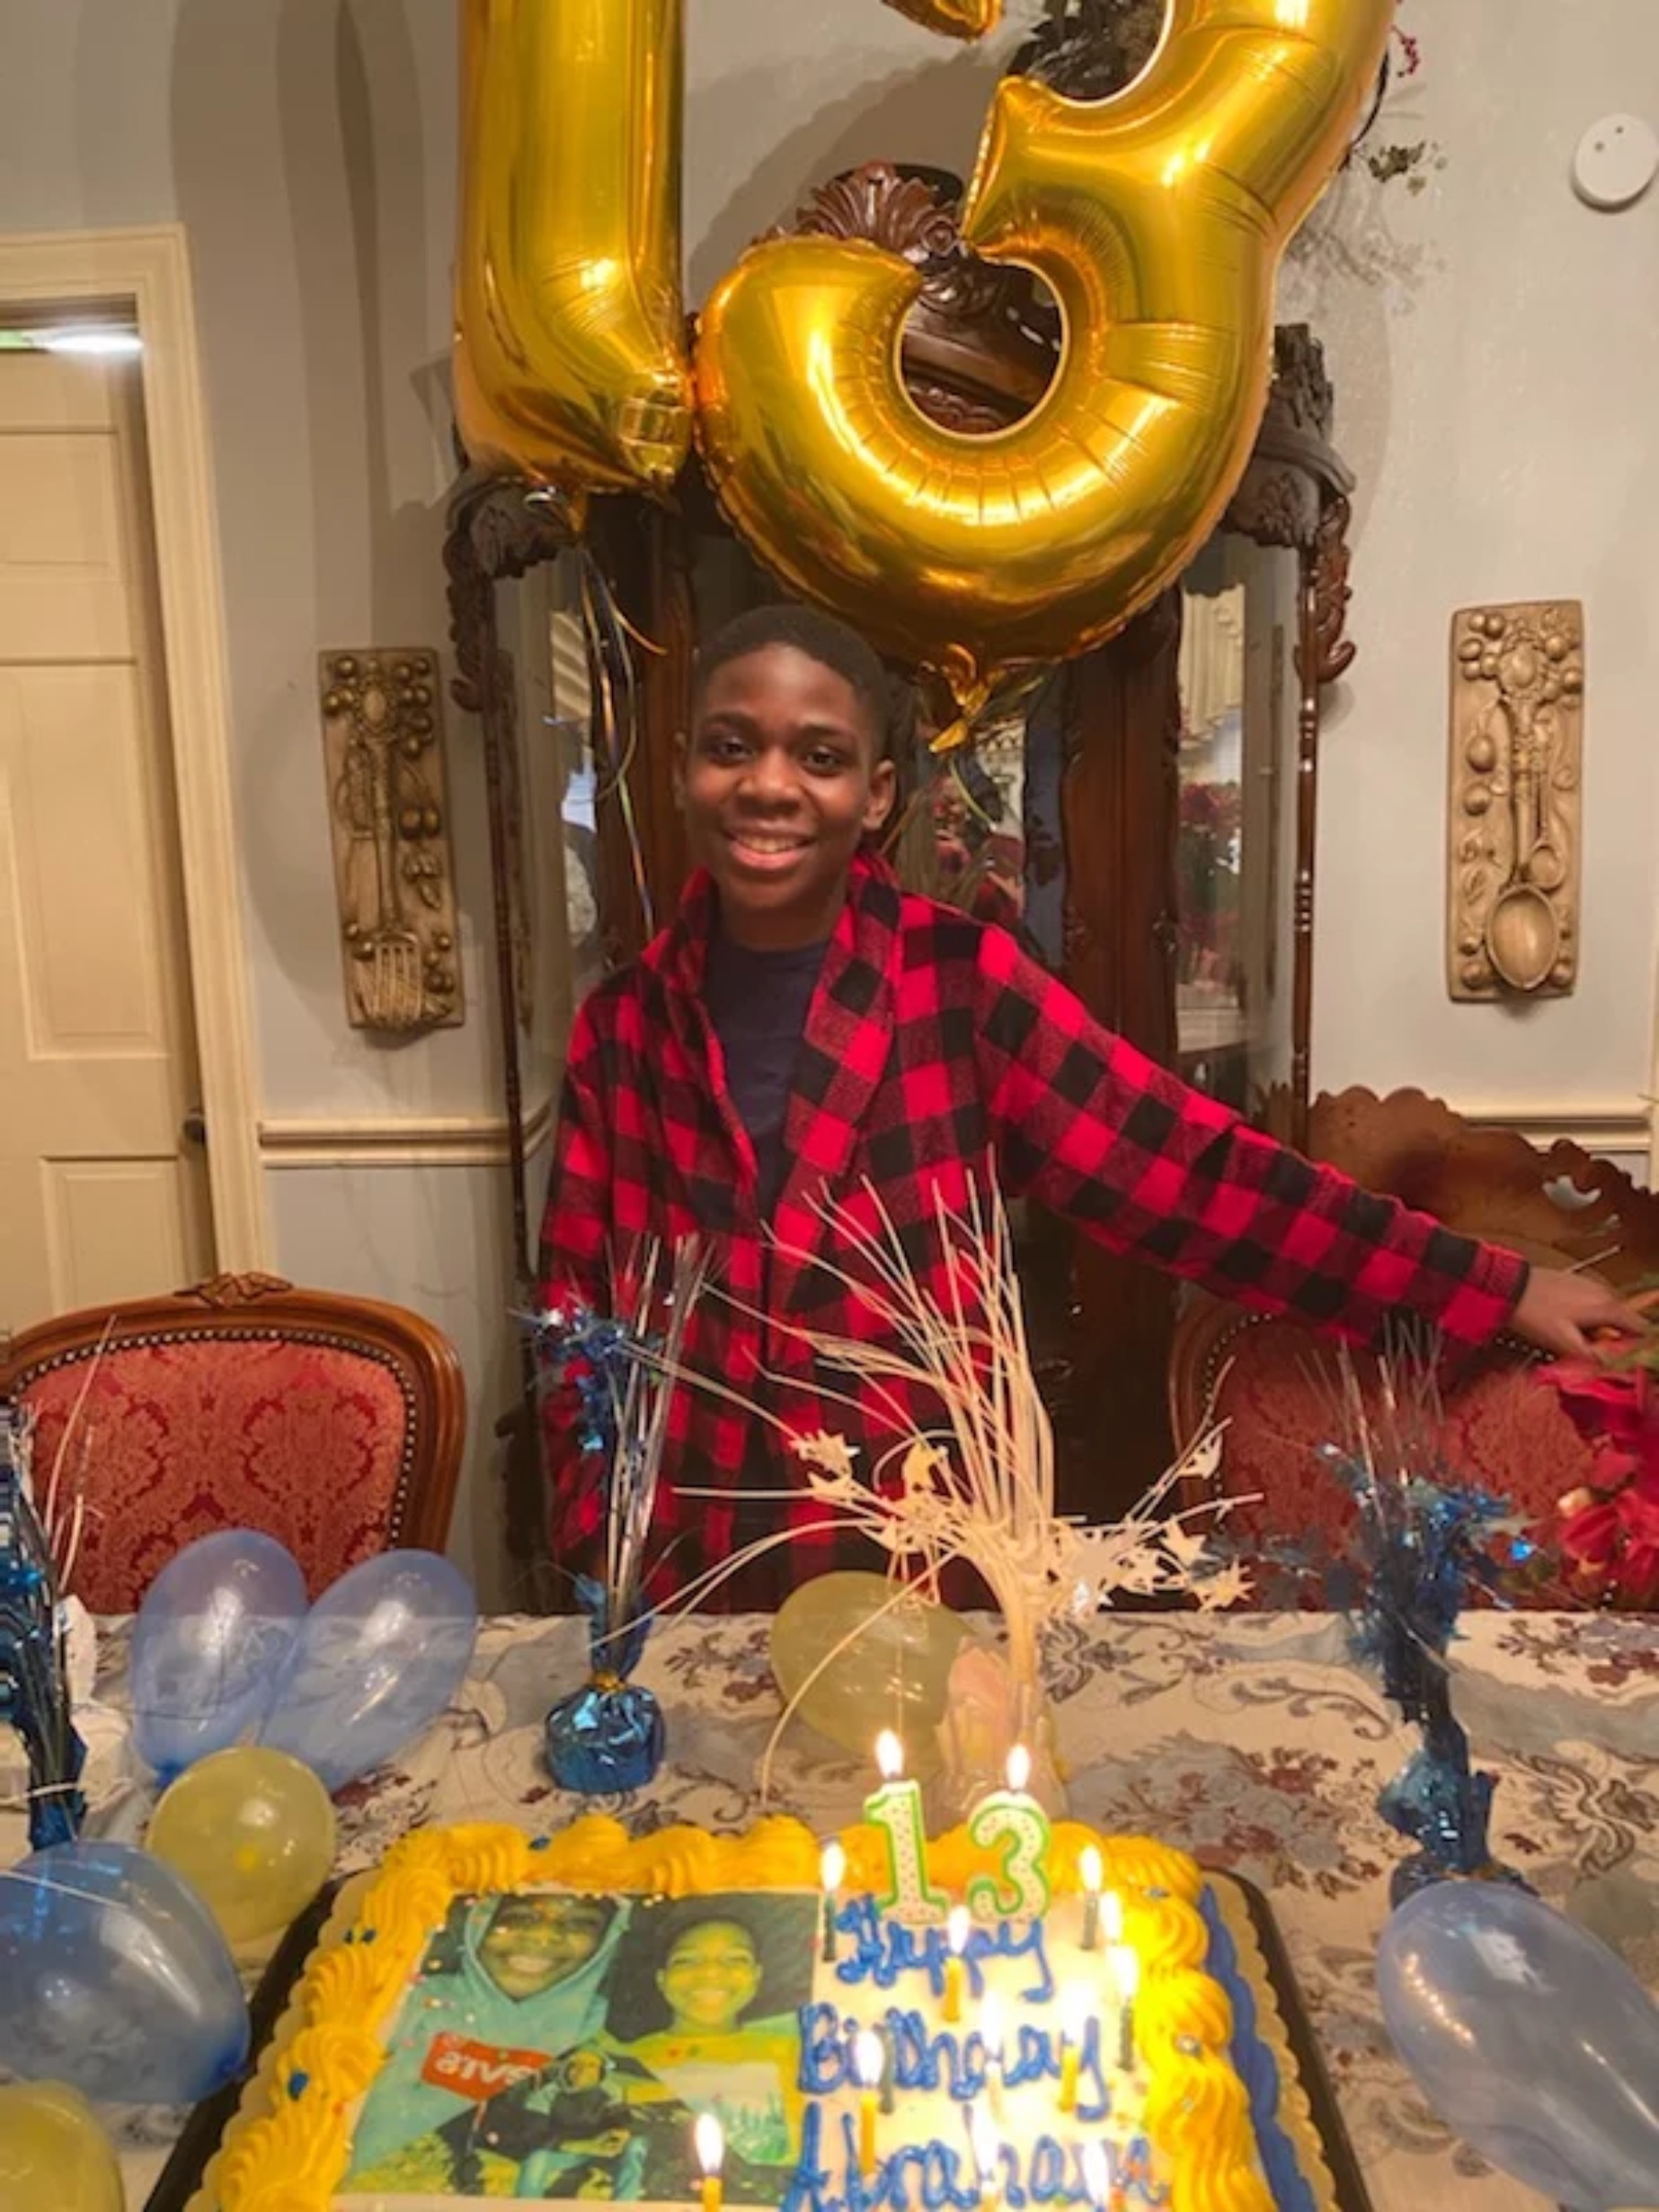 About a year later, he found out better news: His transplant was successful, and he qualified for Make-A-Wish, an organisation that grants wishes to children will serious illnesses.